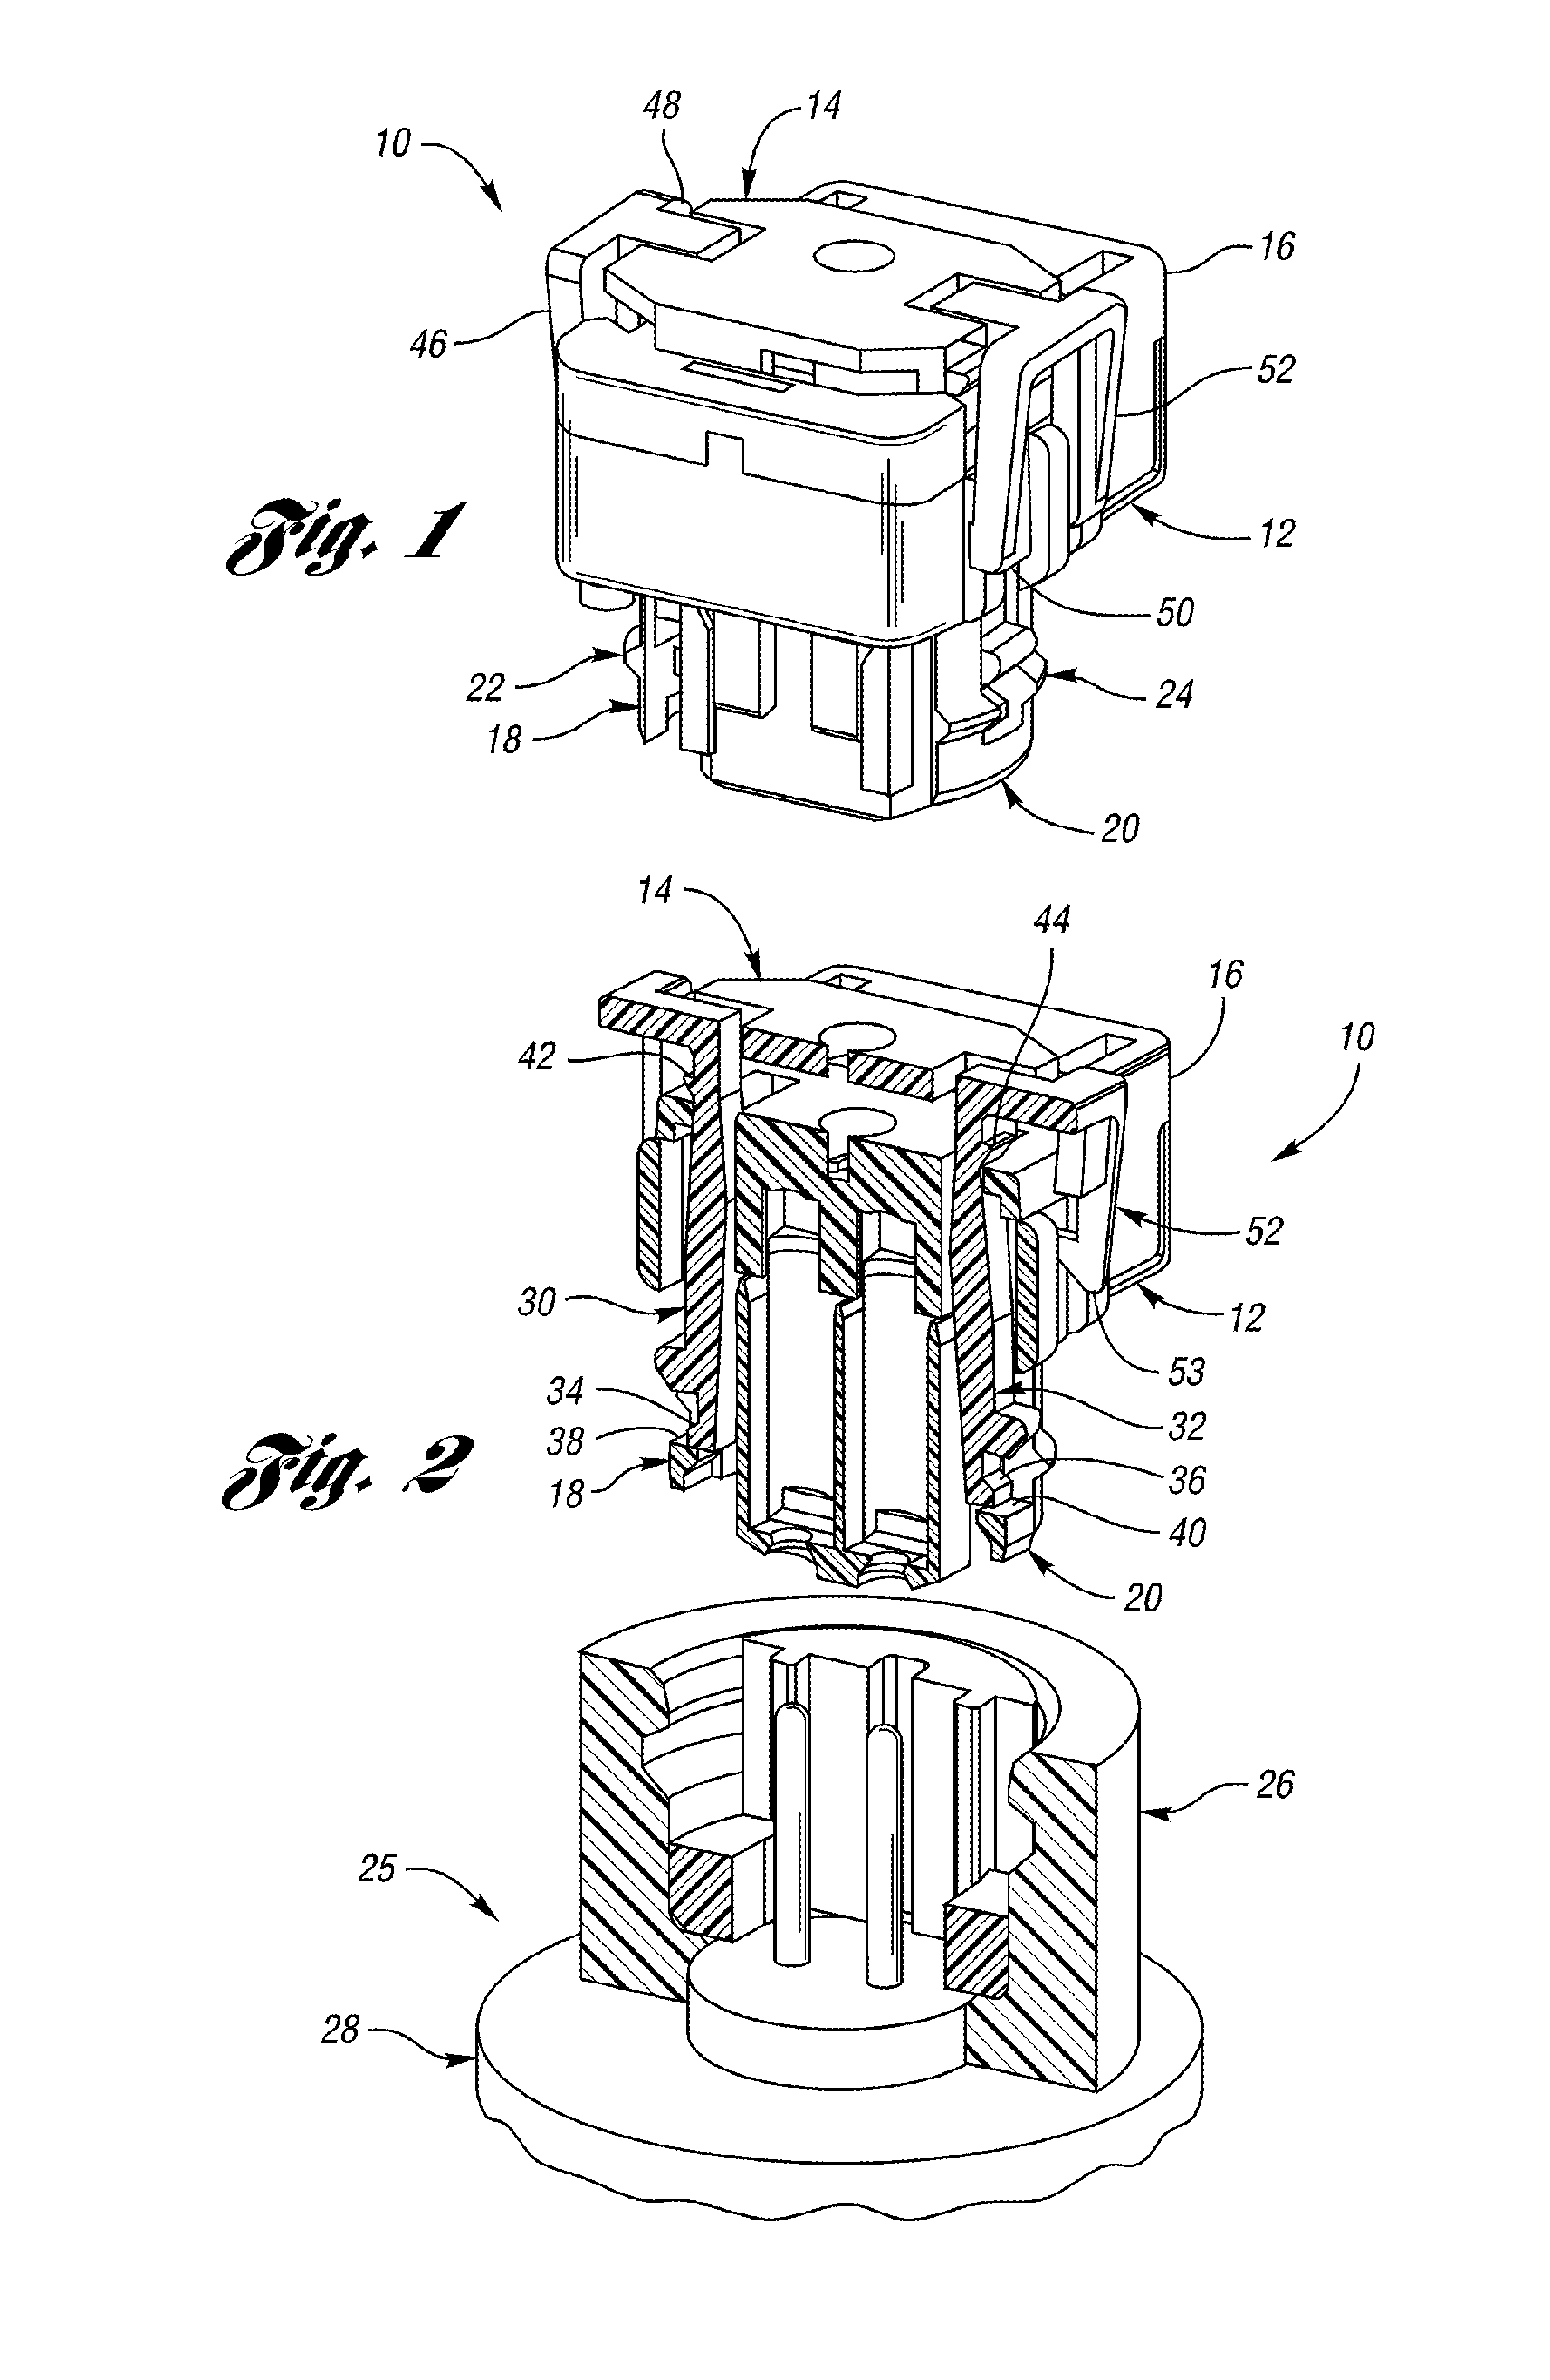 Electrical connector and airbag apparatus having an electrical connector